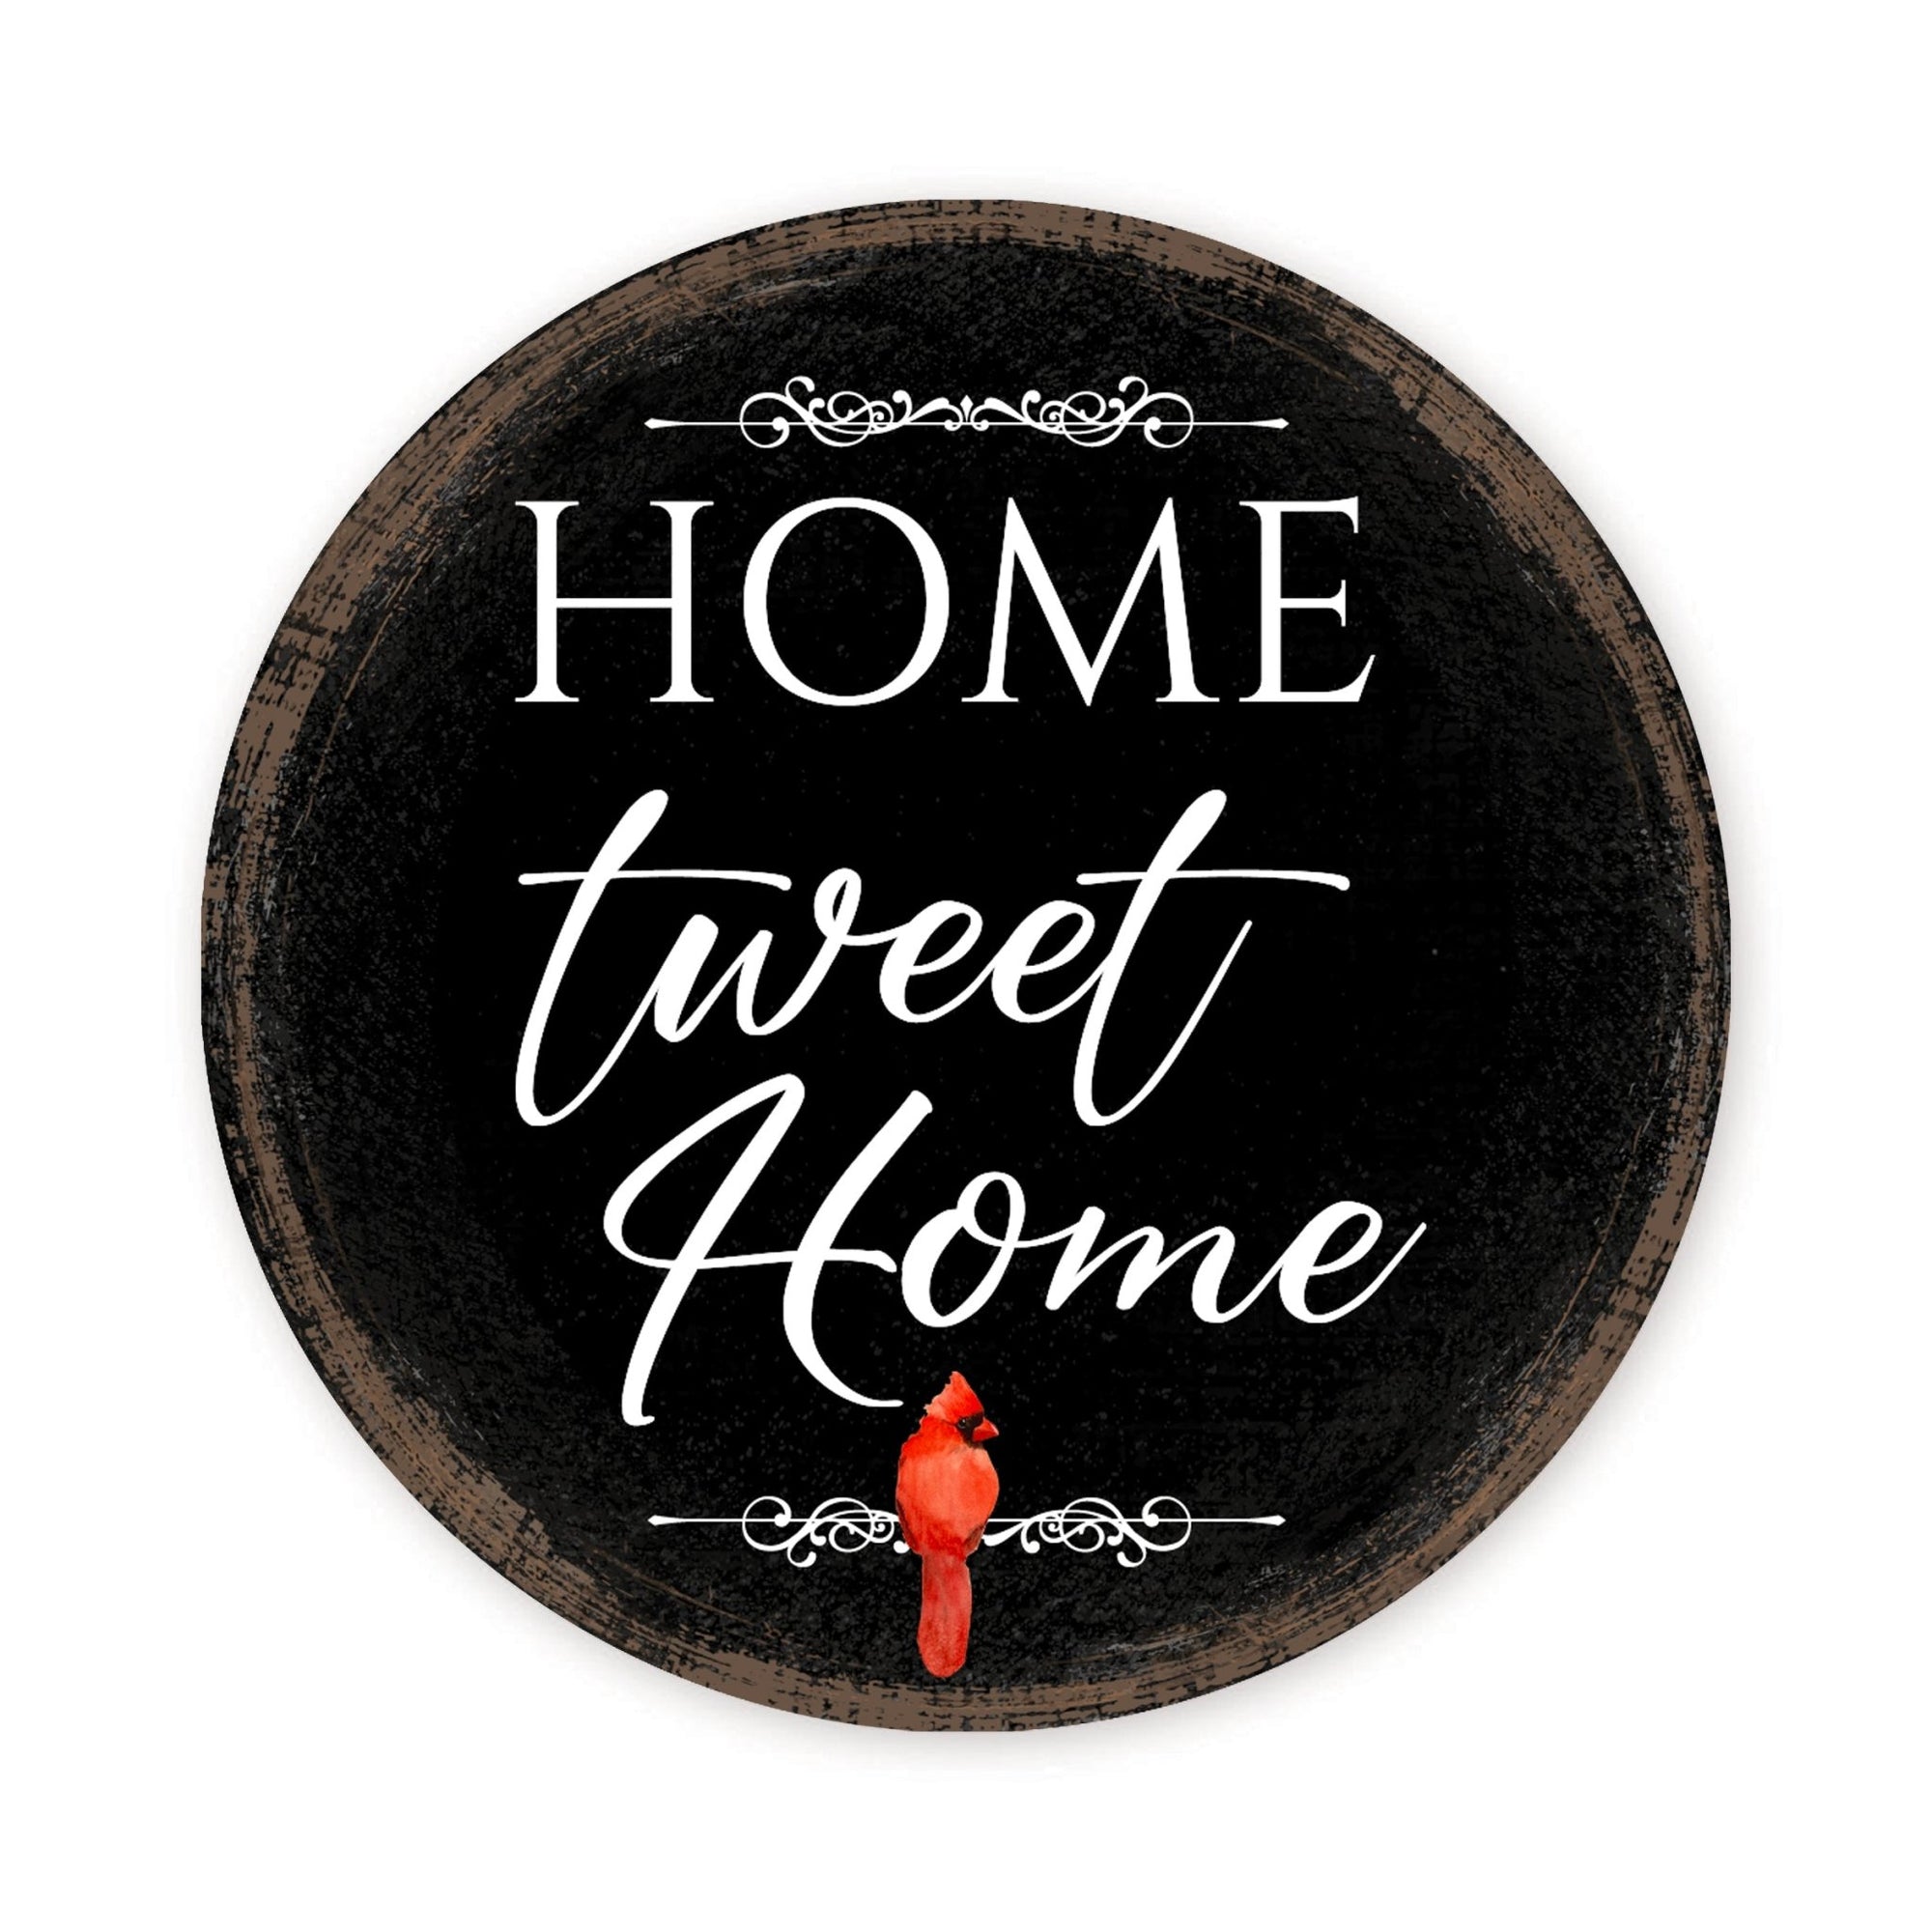 Vintage-Inspired Cardinal Wooden Magnet Printed With Everyday Inspirational Verses Gift Ideas - Home Tweet Home - LifeSong Milestones